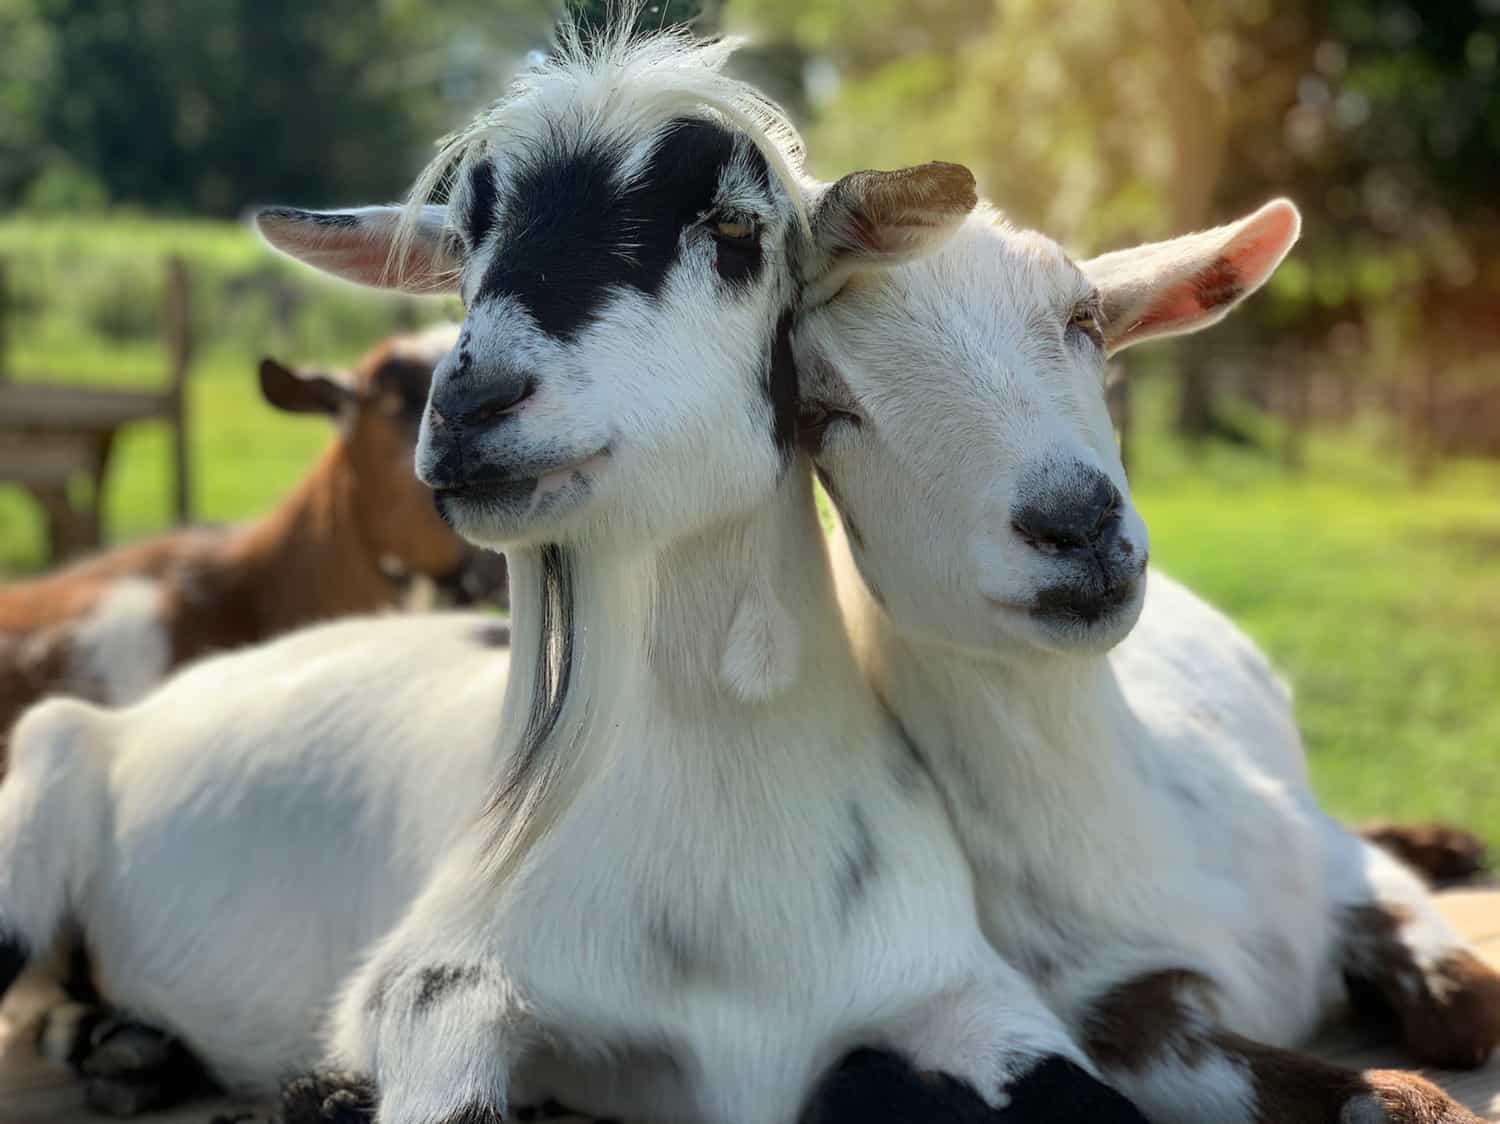 Goats of Anarchy